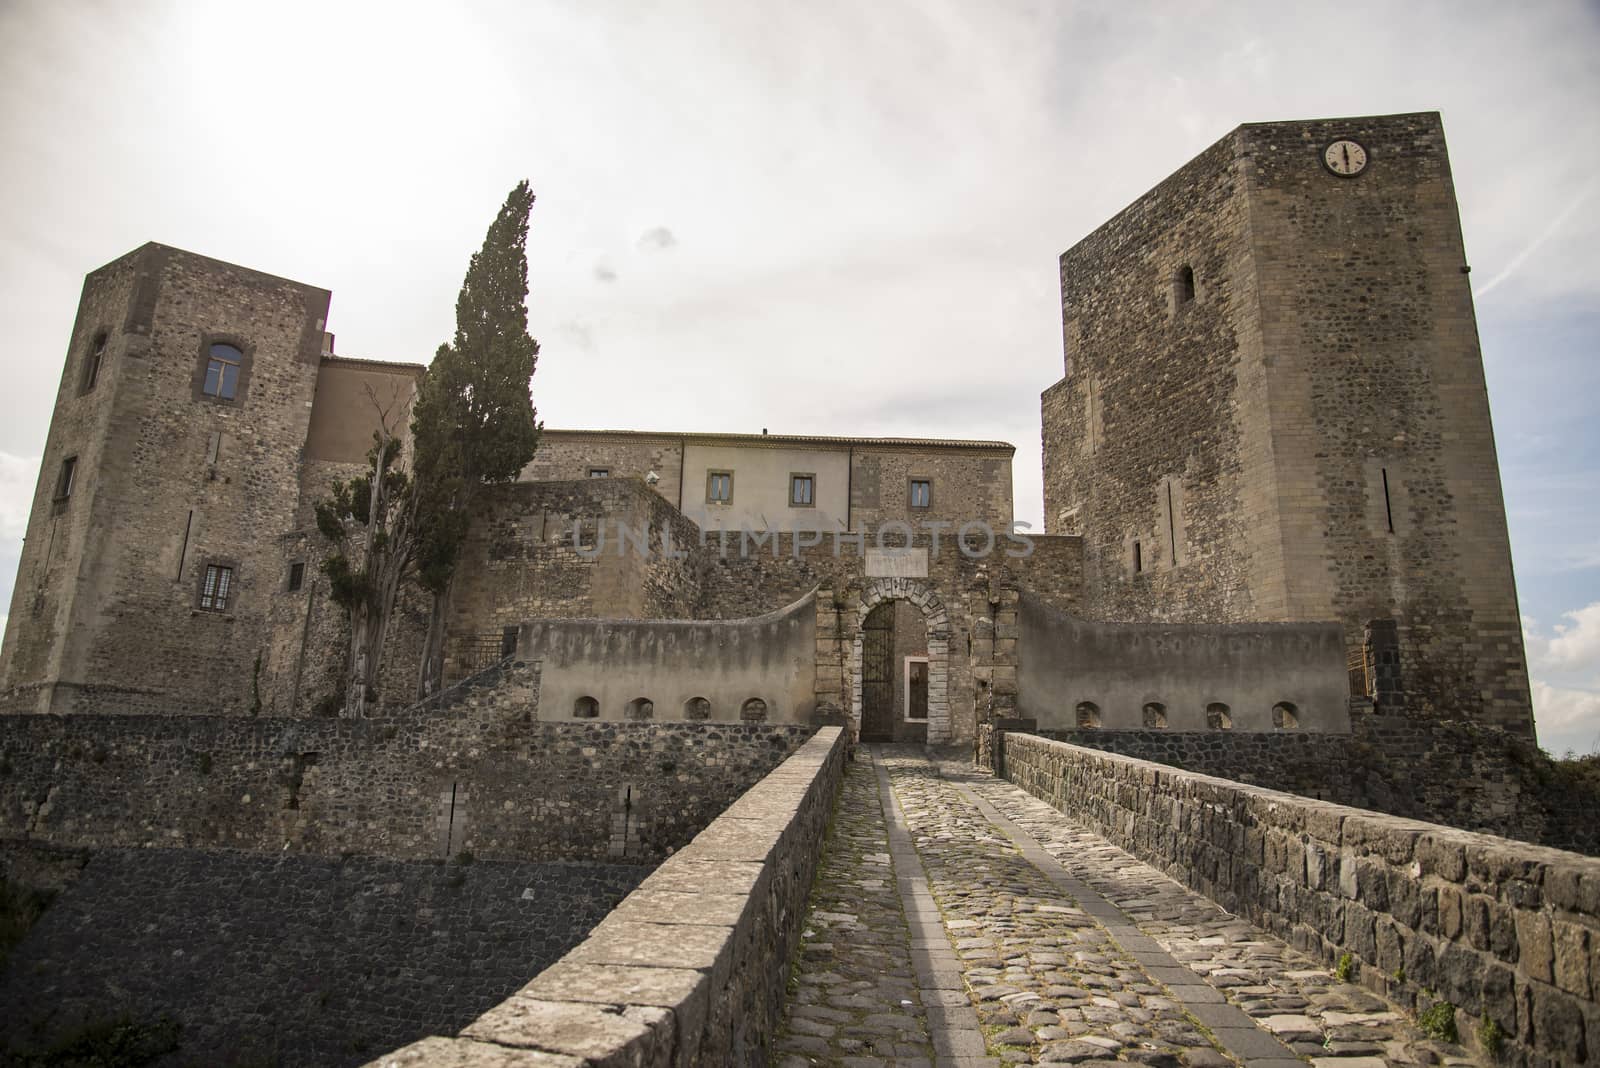 Old and picturesque castle in the small town of Melfi, Italy